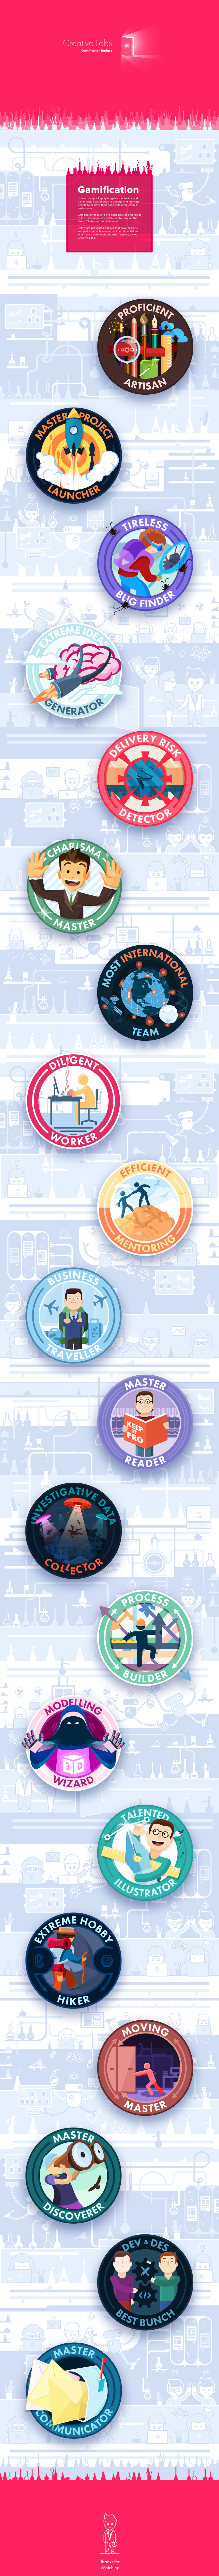 Badges gamification graphic design  ILLUSTRATION  Achievements design agency Fun icons prize vector